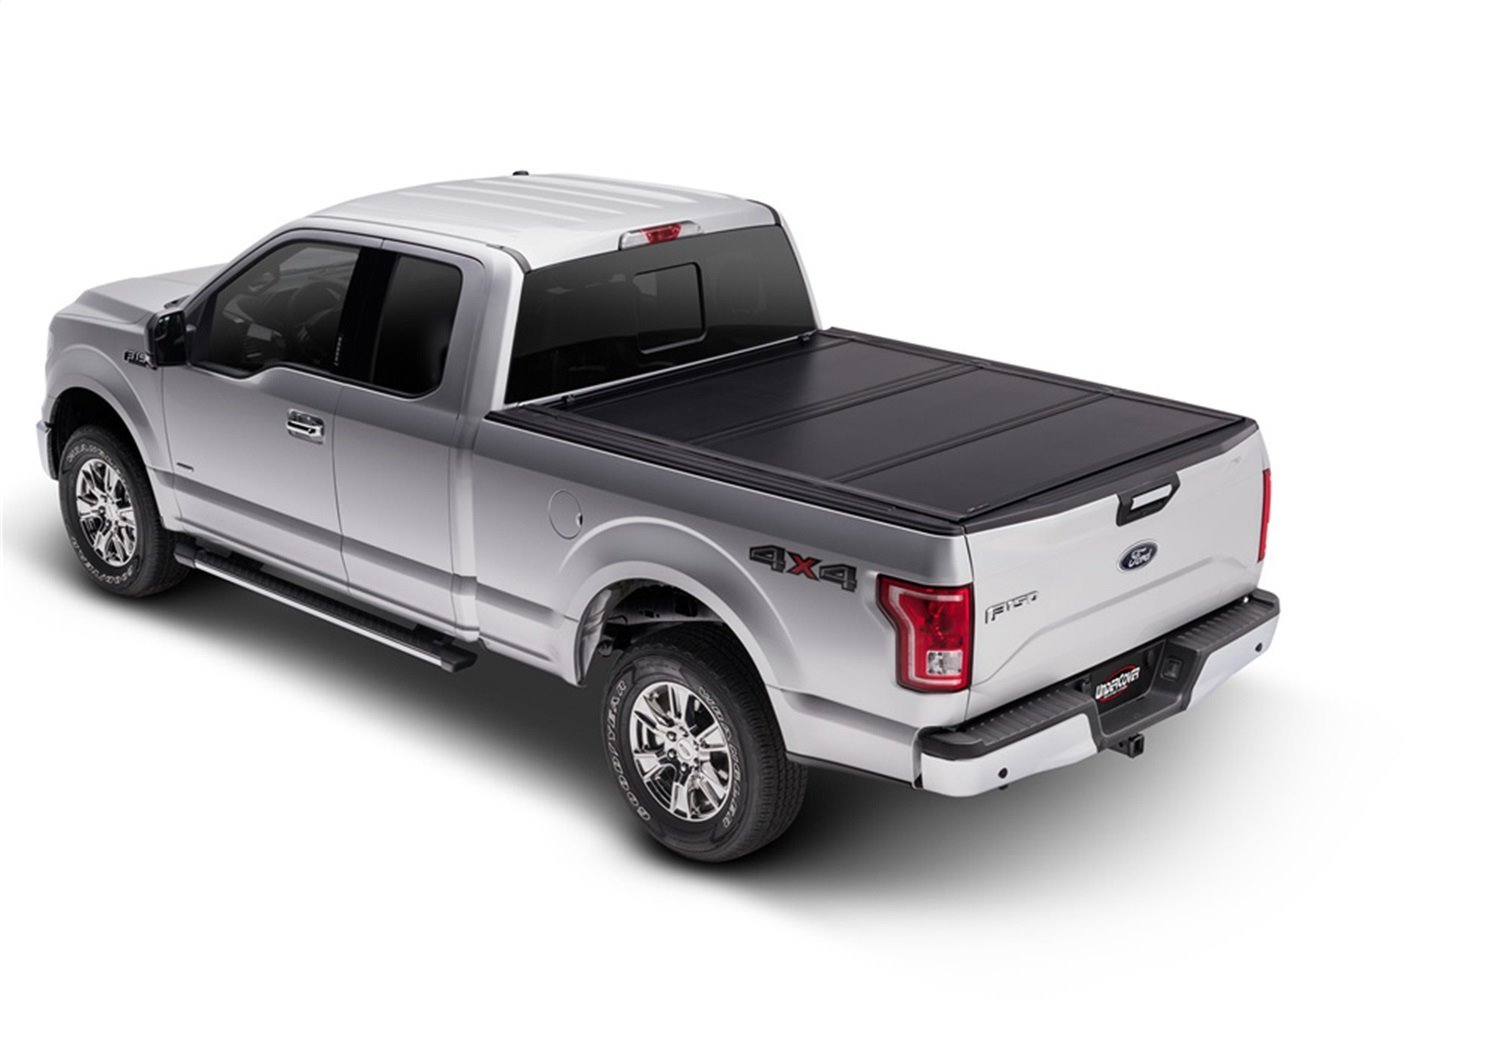 UX22021 Ultra Flex Hard Folding Cover, Fits Select Ford F-250/350 6'10" Bed STD/EXT/Crew, Matte Black Finish